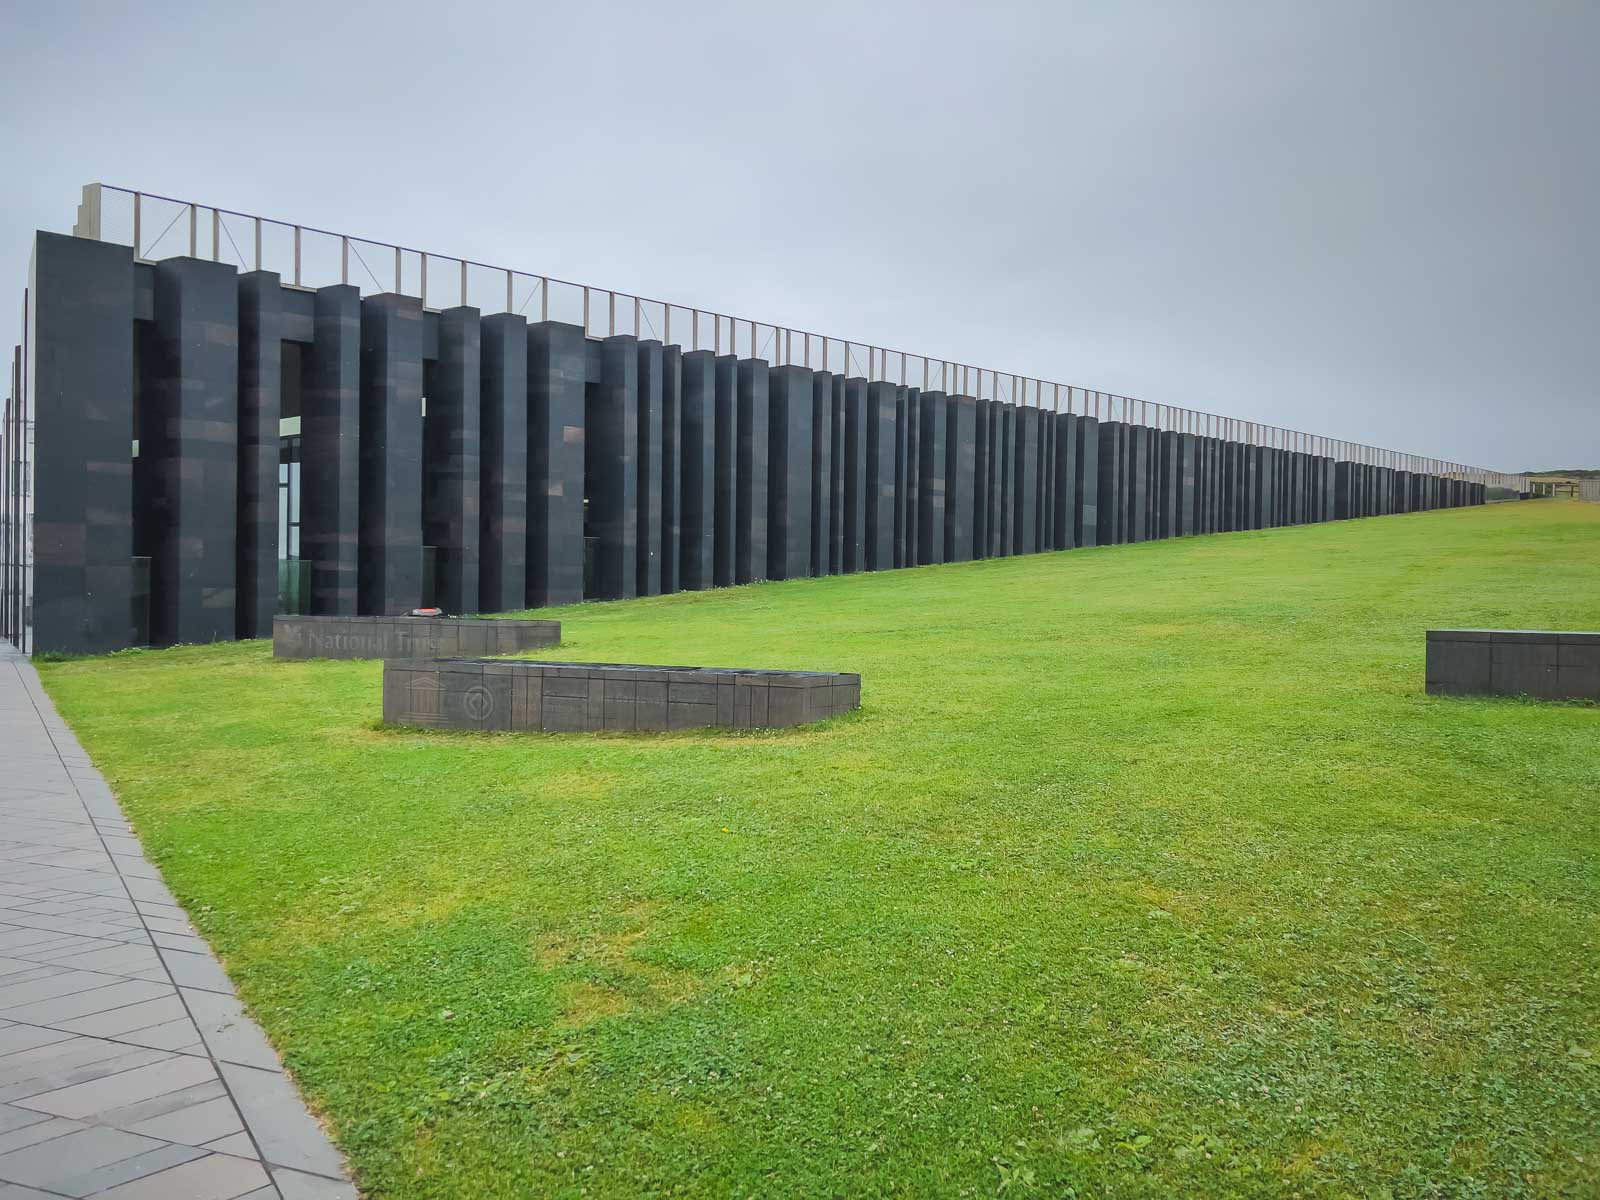 How to visit the Giants Causeway Visitor Center